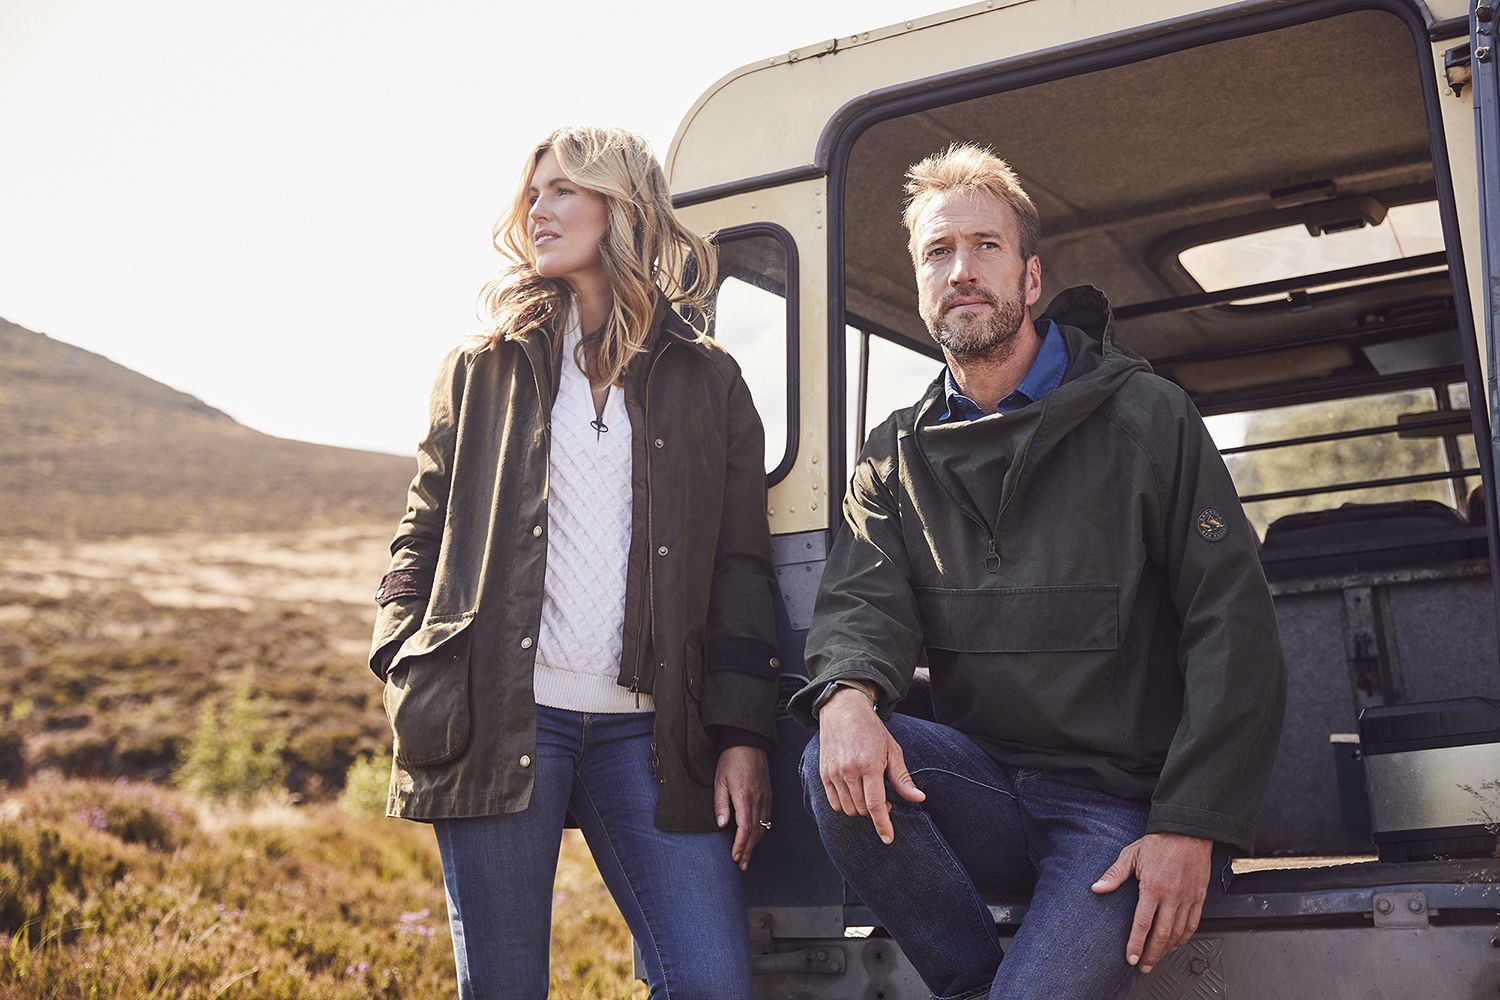 barbour drizzle waterproof breathable jacket